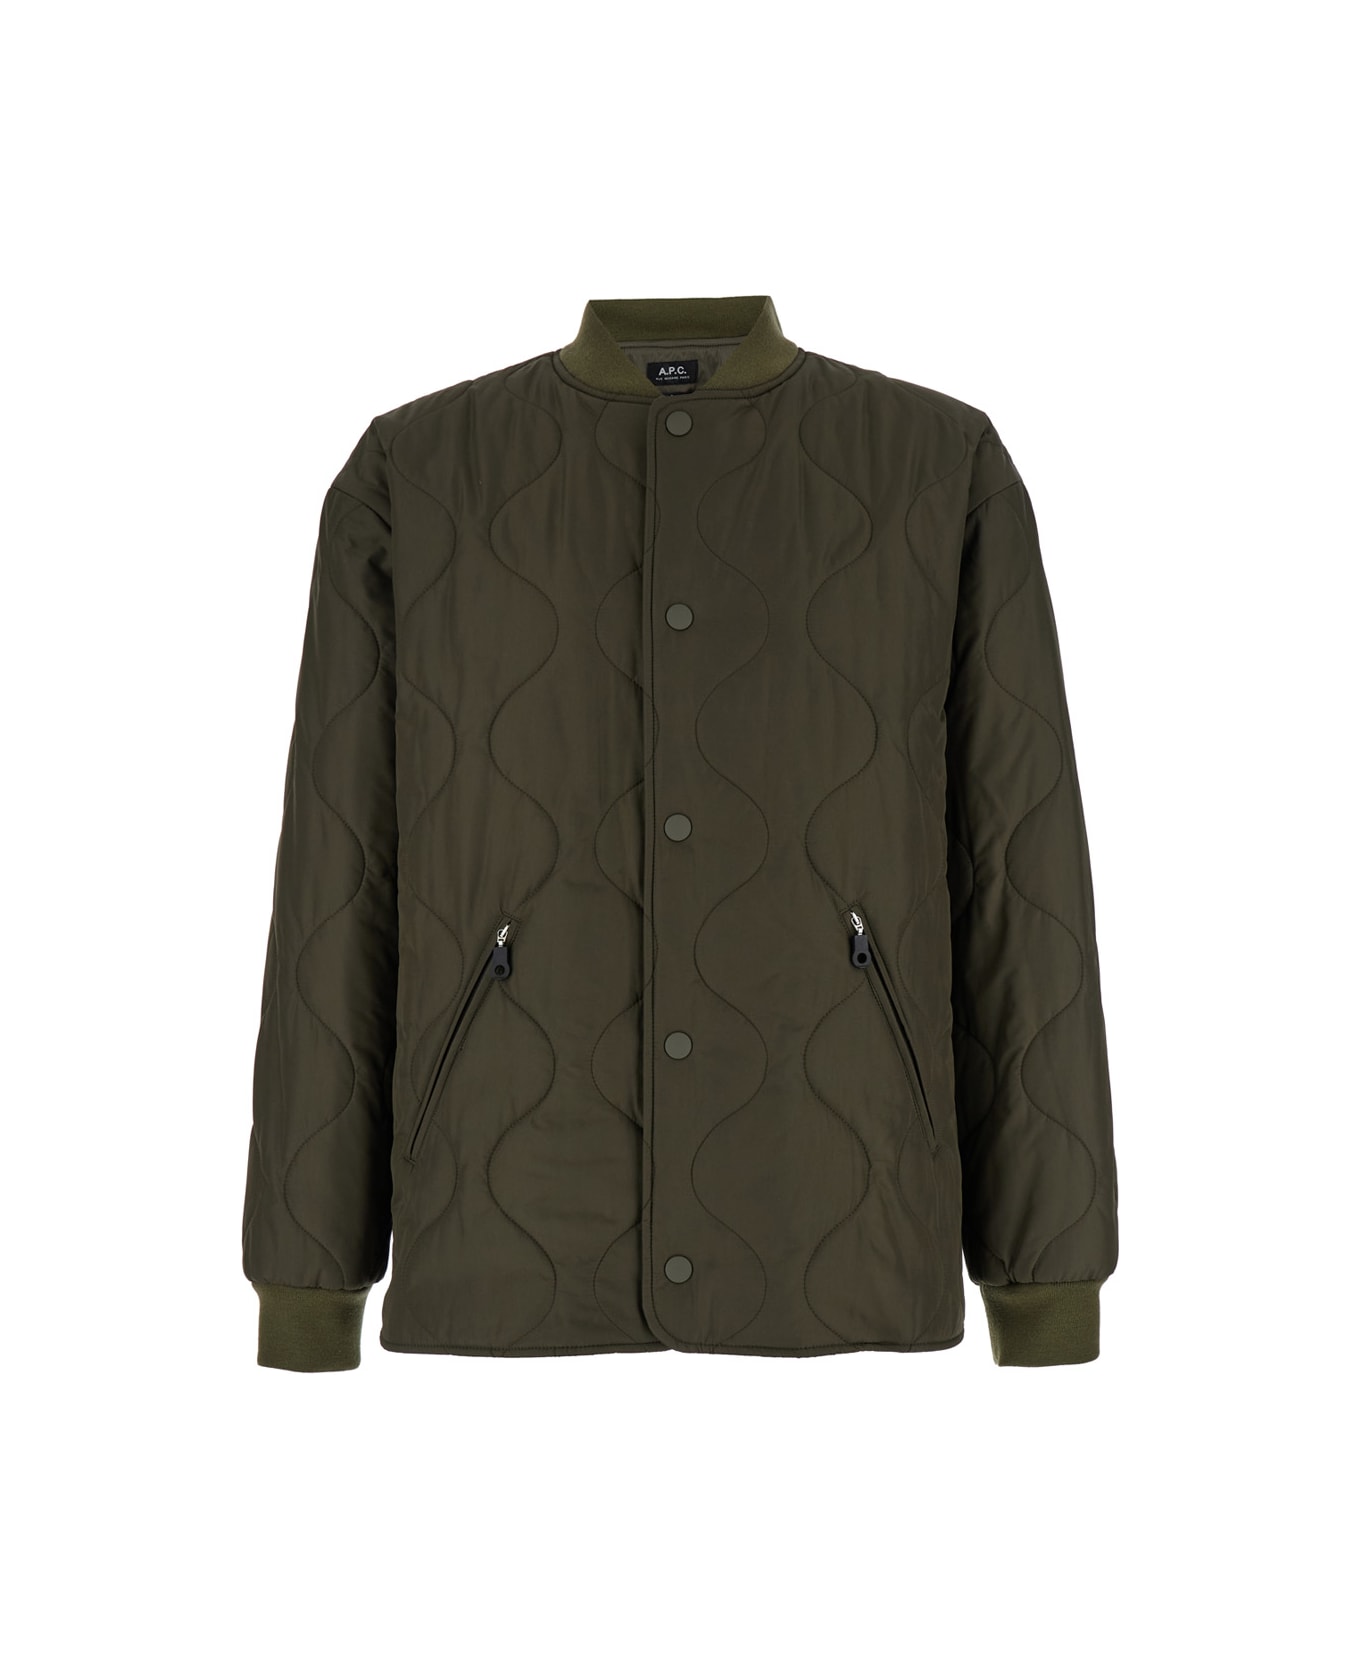 A.P.C. 'florent' Military Green Jacket With Snap Buttons In Quilted Fabric Man - Green